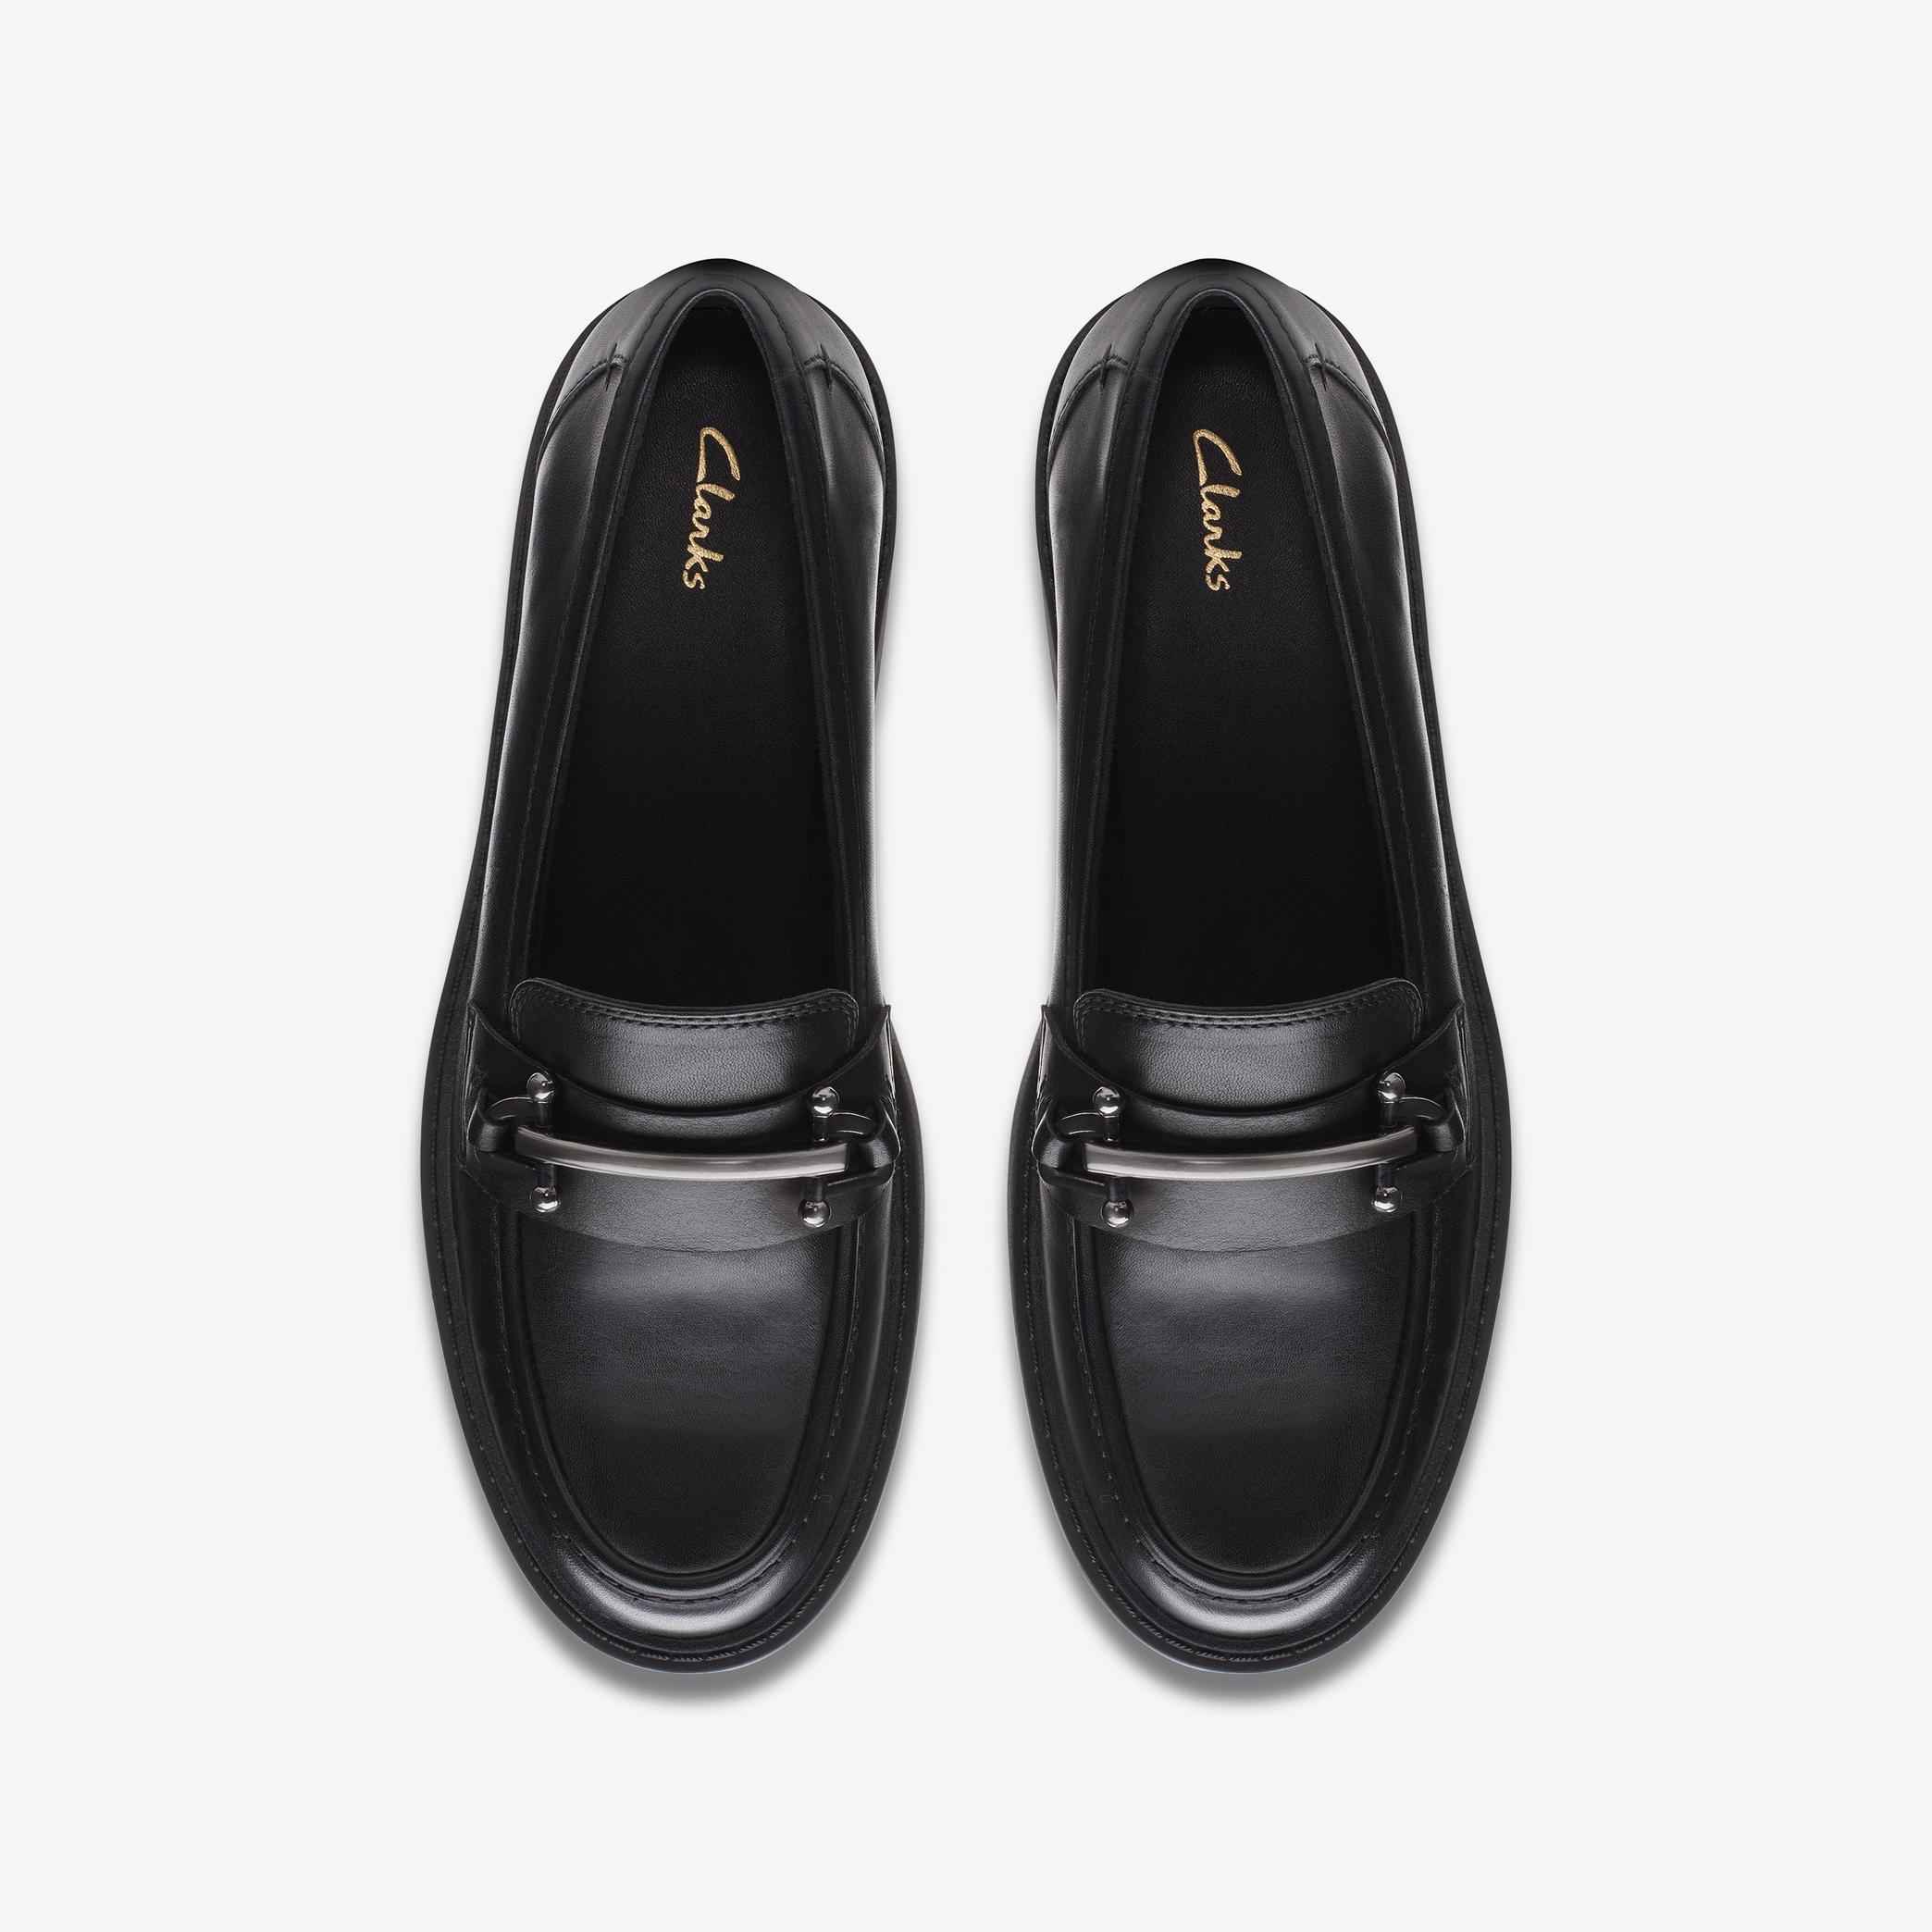 WOMENS Orinoco2 Edge Black Leather Loafers | Clarks Outlet